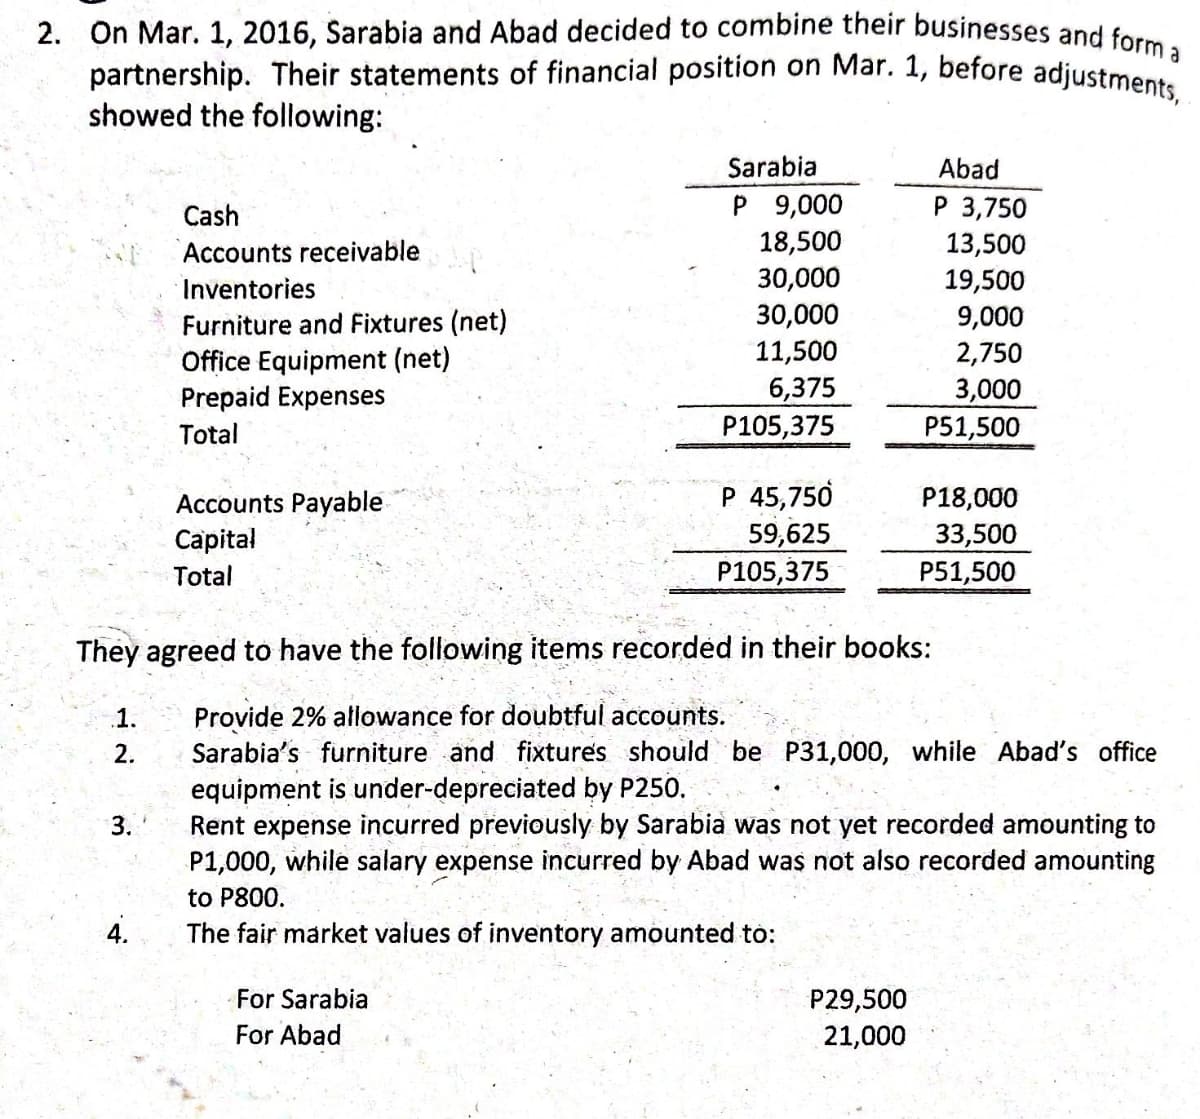 partnership. Their statements of financial position on Mar. 1, before adjustments, .
2. On Mar. 1, 2016, Sarabia and Abad decided to combine their businesses and for
showed the following:
Sarabia
Abad
P 9,000
18,500
30,000
30,000
11,500
P 3,750
13,500
19,500
9,000
Cash
Accounts receivable
Inventories
Furniture and Fixtures (net)
Office Equipment (net)
Prepaid Expenses
2,750
6,375
P105,375
3,000
P51,500
Total
P 45,750
59,625
P105,375
P18,000
Accounts Payable
Capital
33,500
P51,500
Total
They agreed to have the following items recordéd in their books:
Provide 2% allowance for doubtful accounts.
Sarabia's furniture and fixtures should be P31,000, while Abad's office
1.
2.
equipment is under-depreciated by P250.
Rent expense incurred previously by Sarabia was not yet recorded amounting to
P1,000, while salary expense incurred by Abad was not also recorded amounting
3.
to P800.
The fair market values of inventory amounted to:
For Sarabia
P29,500
For Abad
21,000
